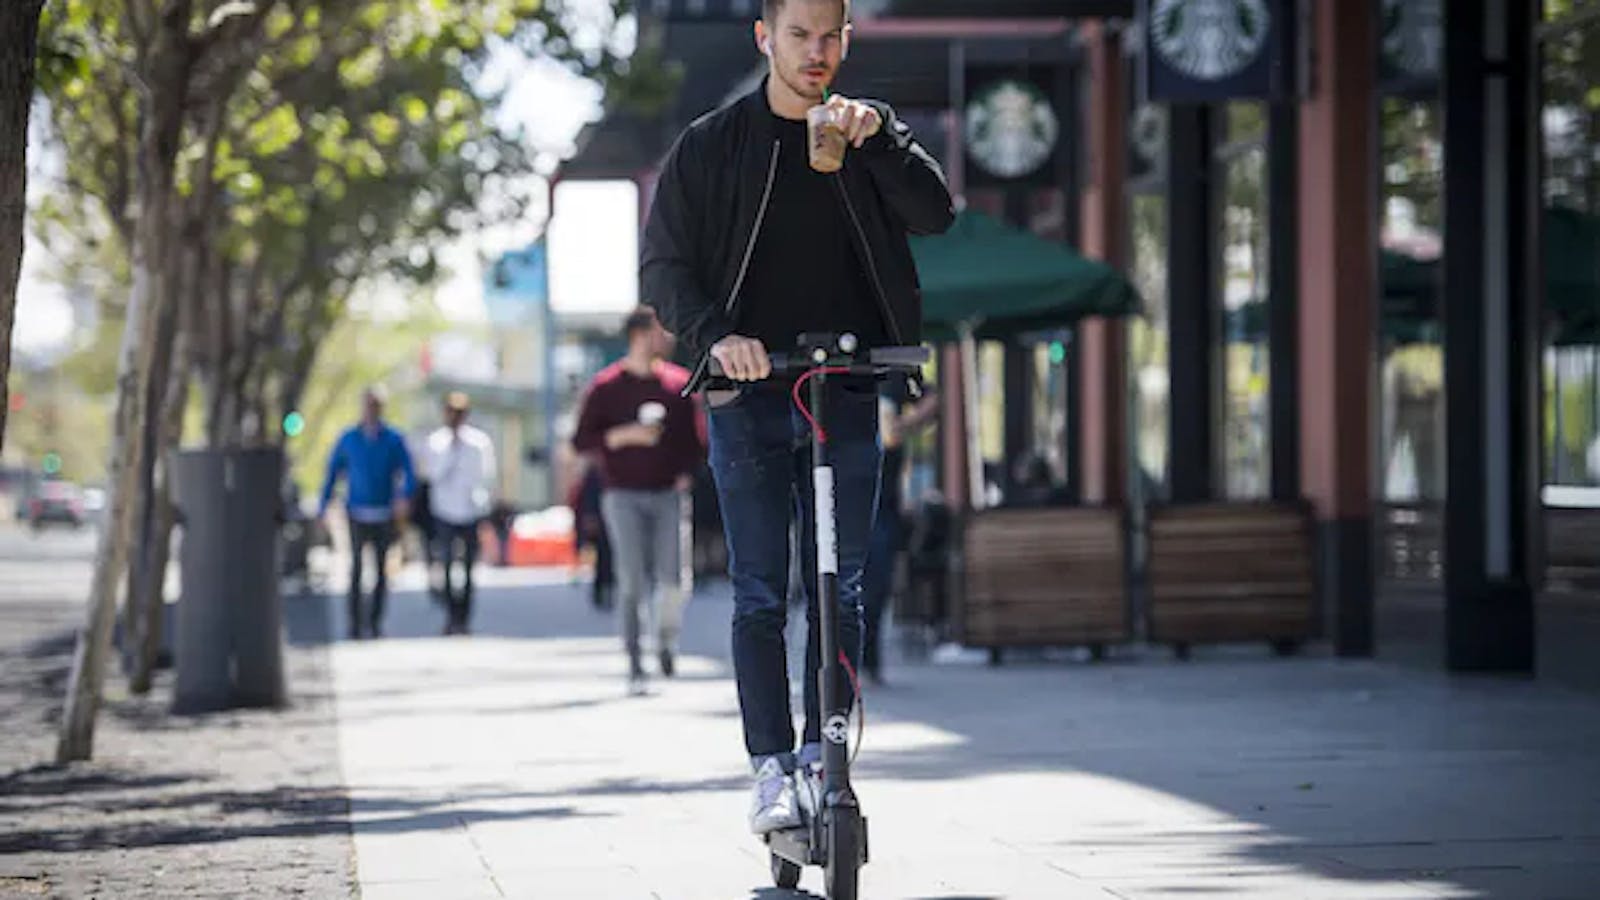 A bird scooter in San Francisco. Photo by Bloomberg